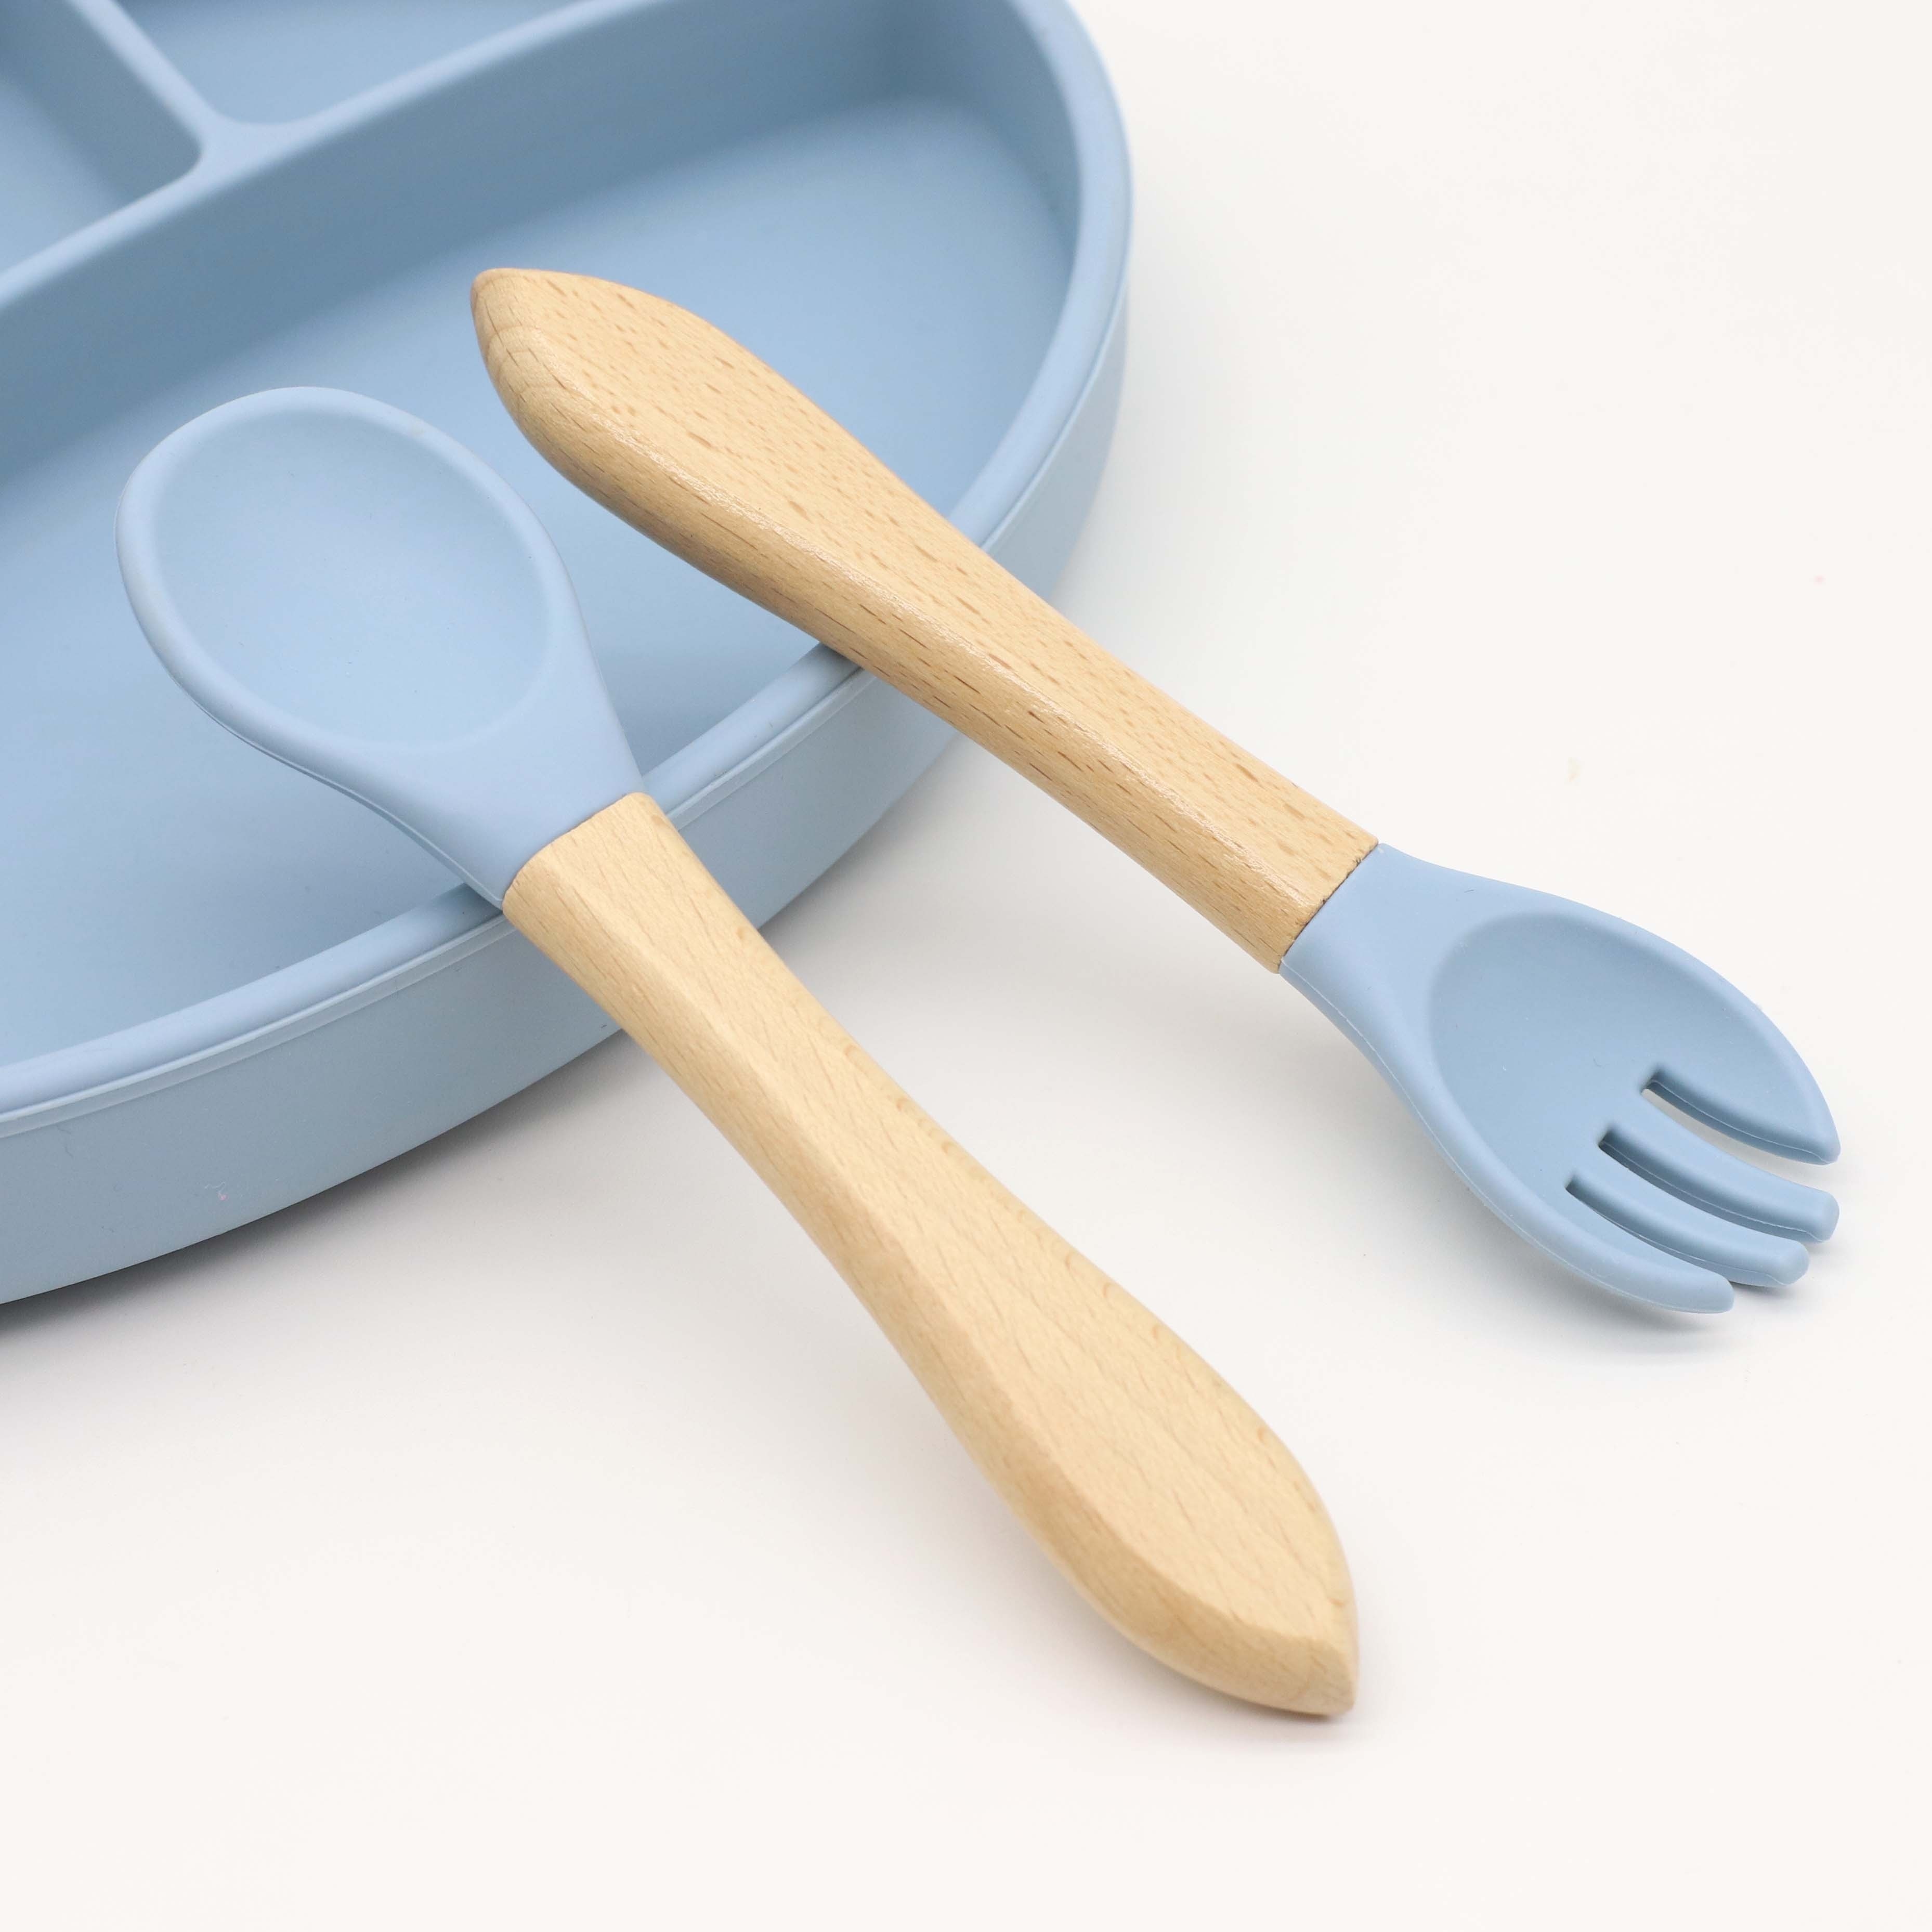 Silicone Spoon Fork for Baby Utensils